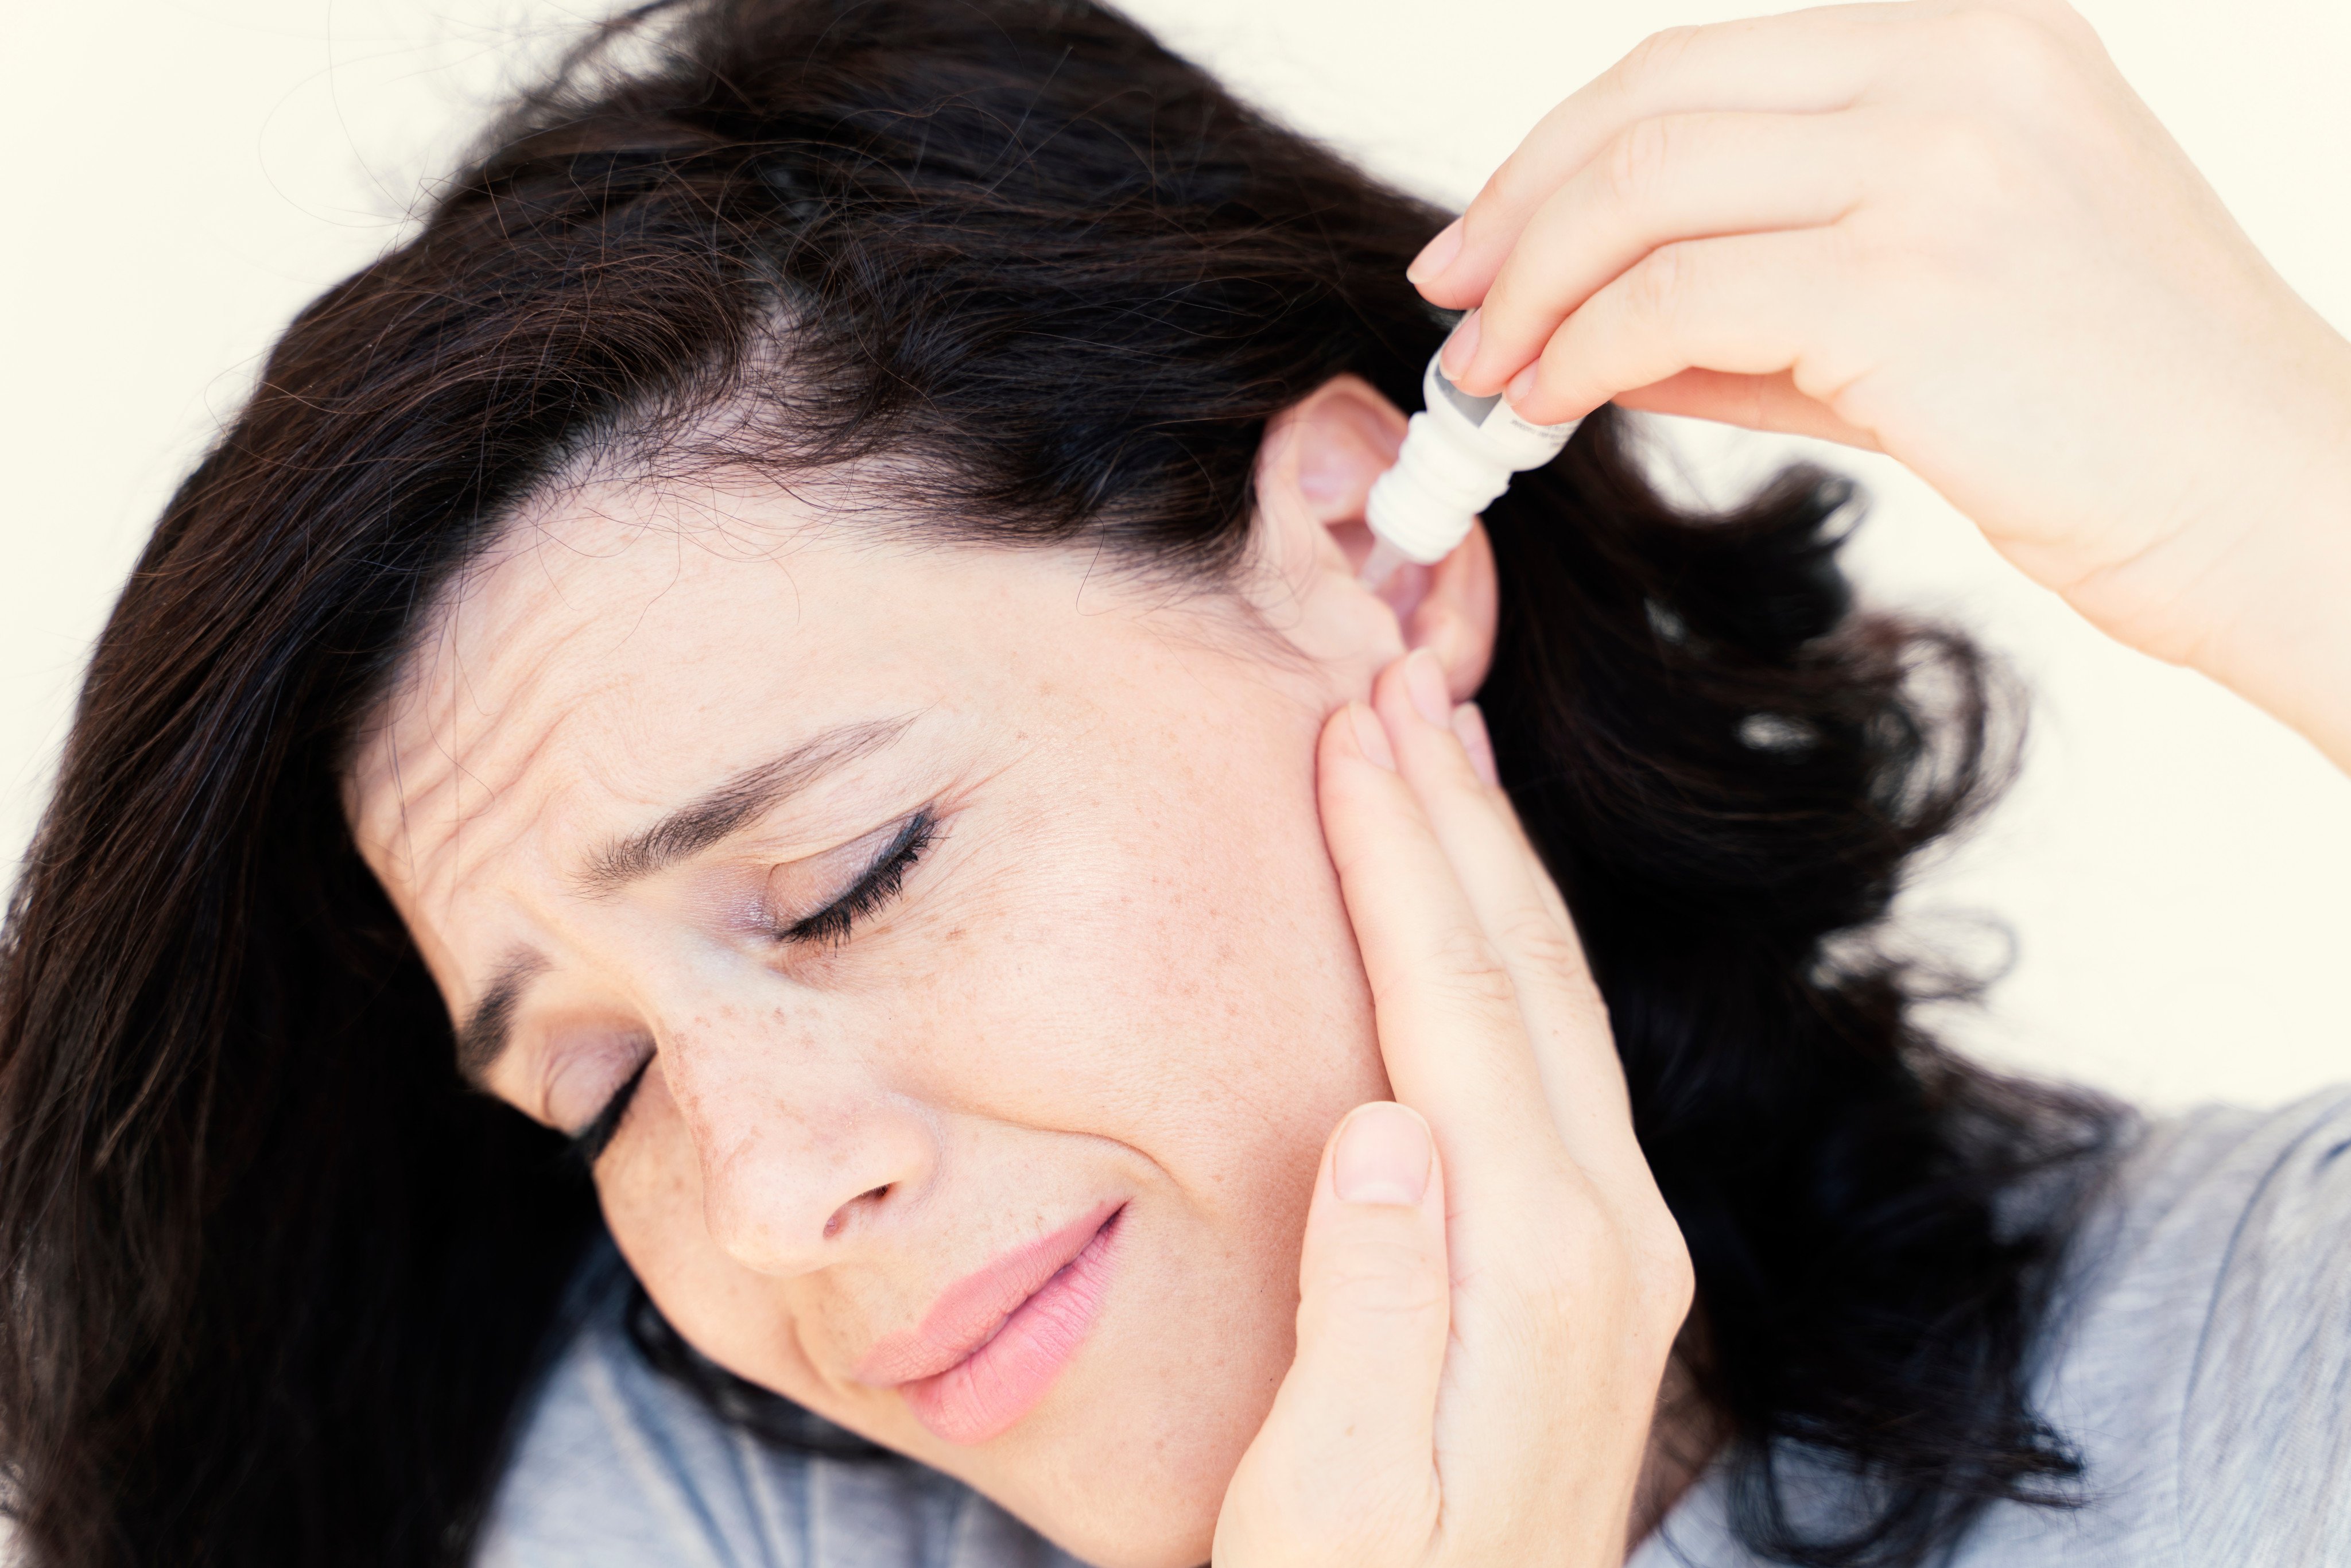 Ear oiling - adding drops of essential oil such as tea tree oil - to the ear canal, then massaging the ear, is one of several remedies for earache in  Ayurveda, or traditional Indian medicine. Photo: Shutterstock